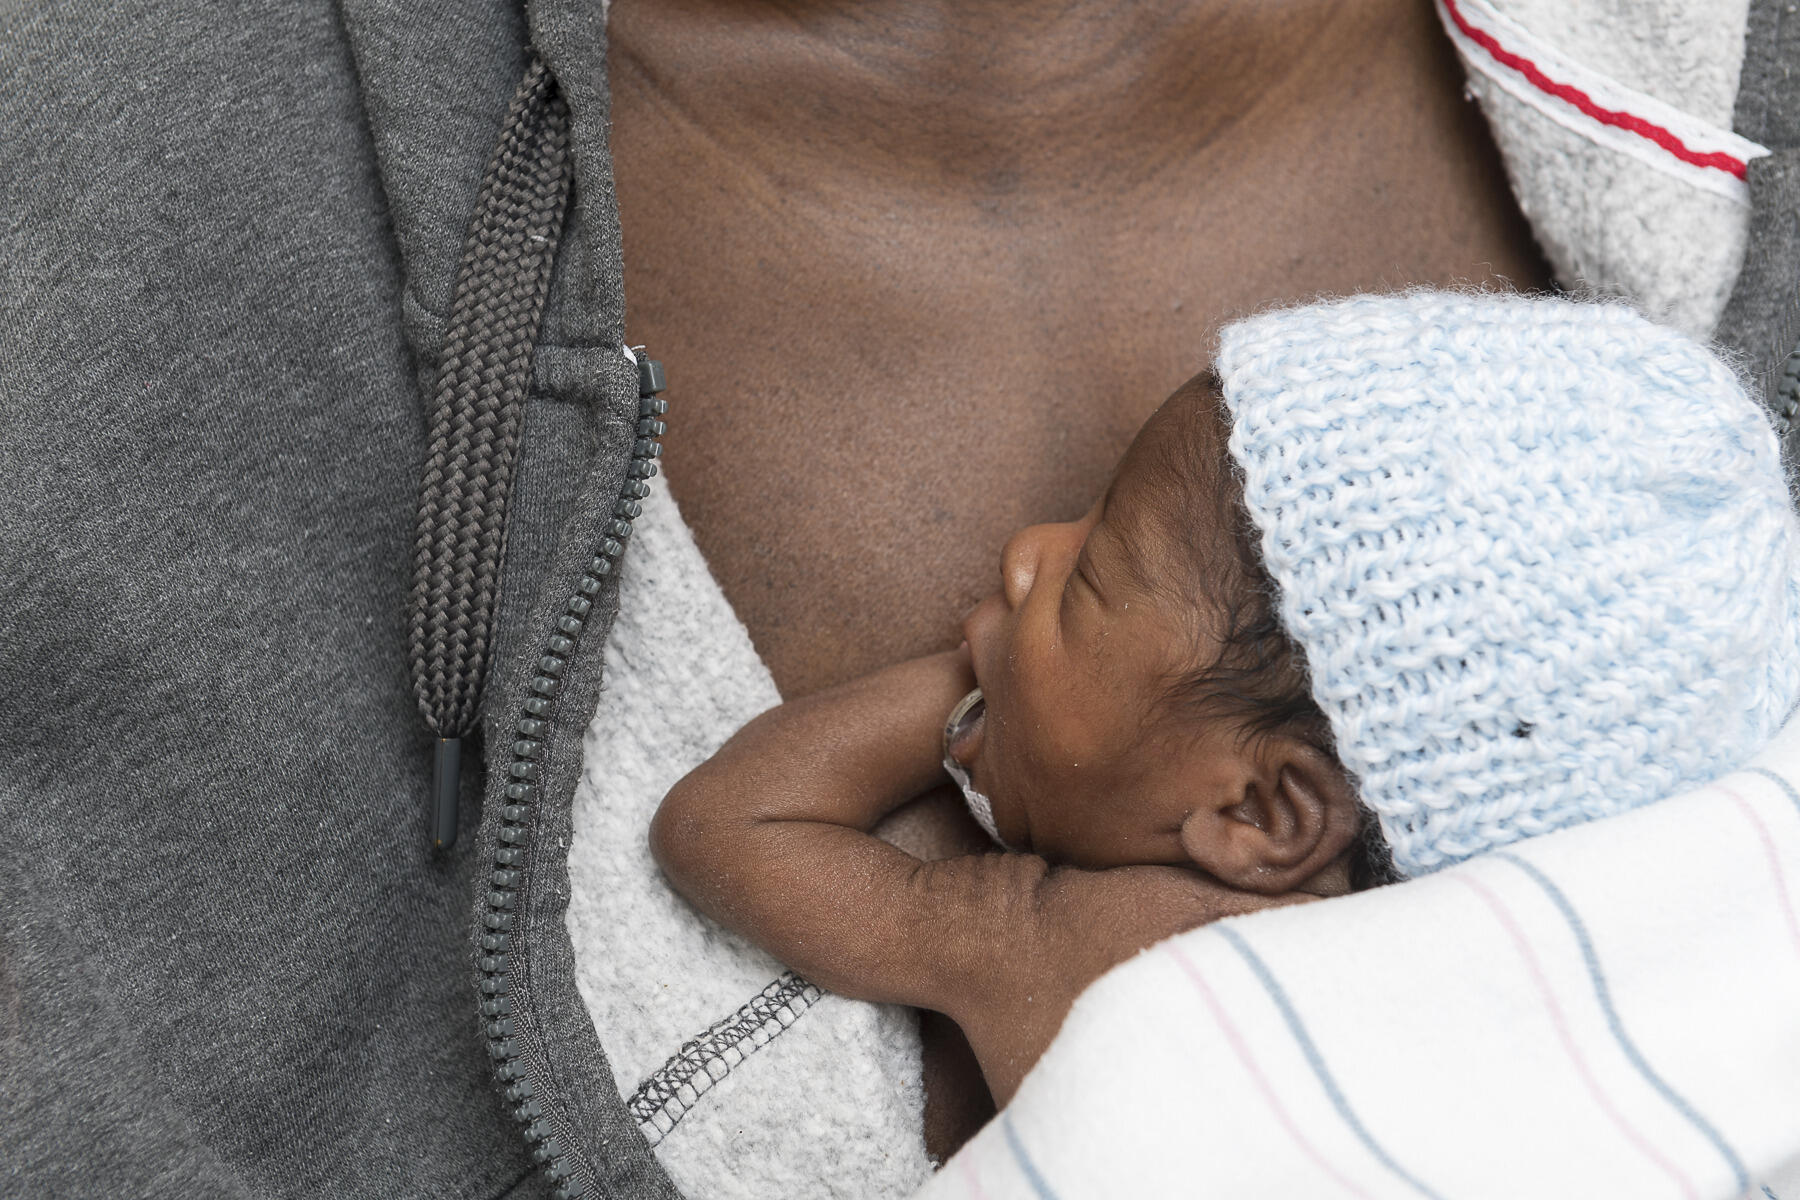 The comfort of kangaroo care and skin-to-skin-contact, provided as soon as safely possible for a newborn and as often as possible for an infant in the NICU, supports attachment and bonding for both the infant and parent and provides a calm, soothing environment closer to what the baby experienced before birth.